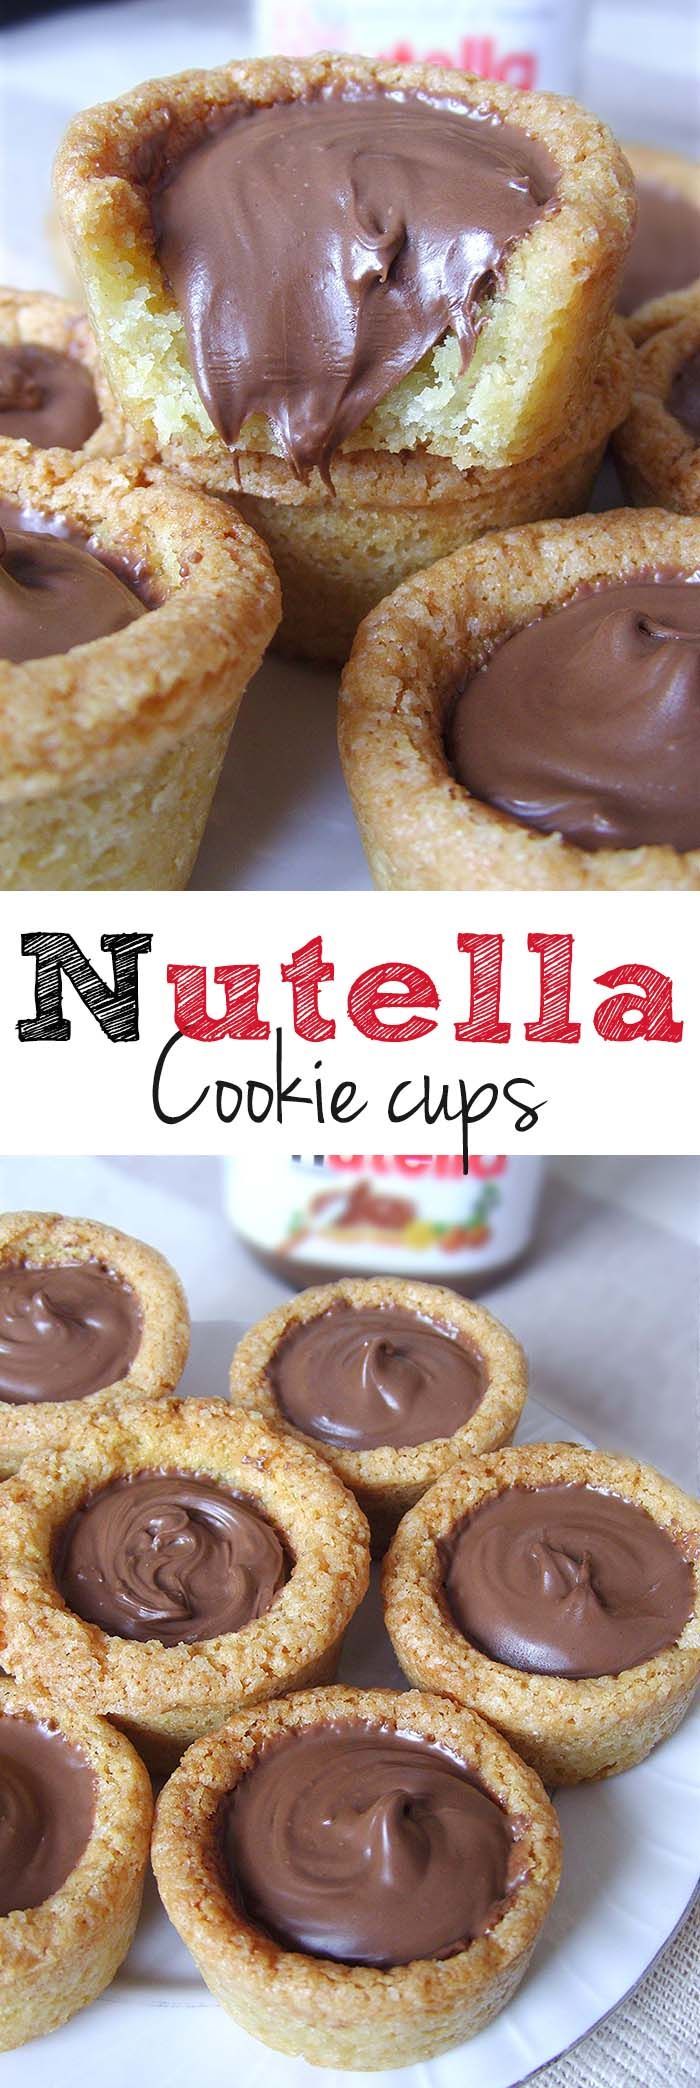 Nutella Cookie Cups – Cute, bite-sized and always fun for Holiday desserts.